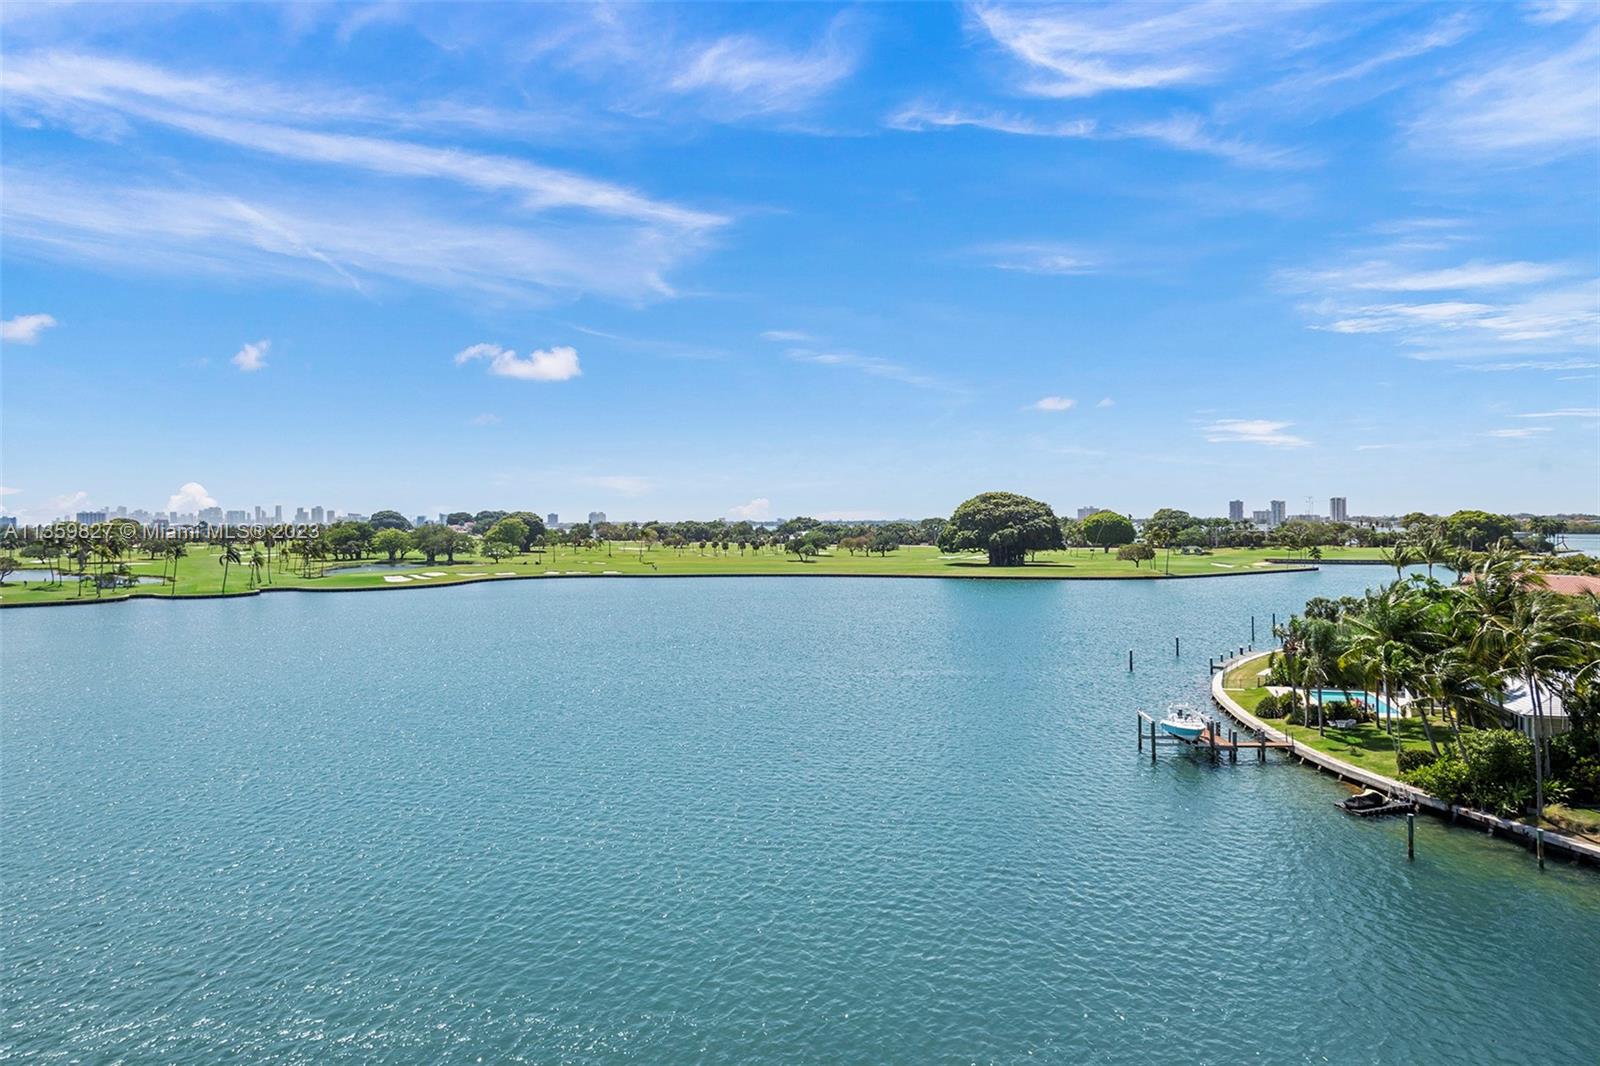 One of the most coveted boutique bldgs in Bay Harbor Islands, w only 18 units. Enjoy breathtaking wide water views of Indian Creek Lake, Golf Course, Biscayne Bay & spectacular Miami sunsets. 
Spacious 2/2.5 residence with 2400 sq ft, tons of natural light with 2 skylights and floor to ceiling glass, large eat-in kitchen and oversized bedrooms. Master suite features 2 walk-in closets & master bath with Jacuzzi tub & separate shower. Large covered terrace and laundry room. Amenities include 24hr doorman, waterfront pool, party room w kitchen, gym. 2 Parking spaces including 1 Private Garage + 2 storage areas.
Walk to beach, renowned Bal Harbour Shops, A-rated K-8 school & restaurants galore. A true gem in a very special
community. Easy to show.